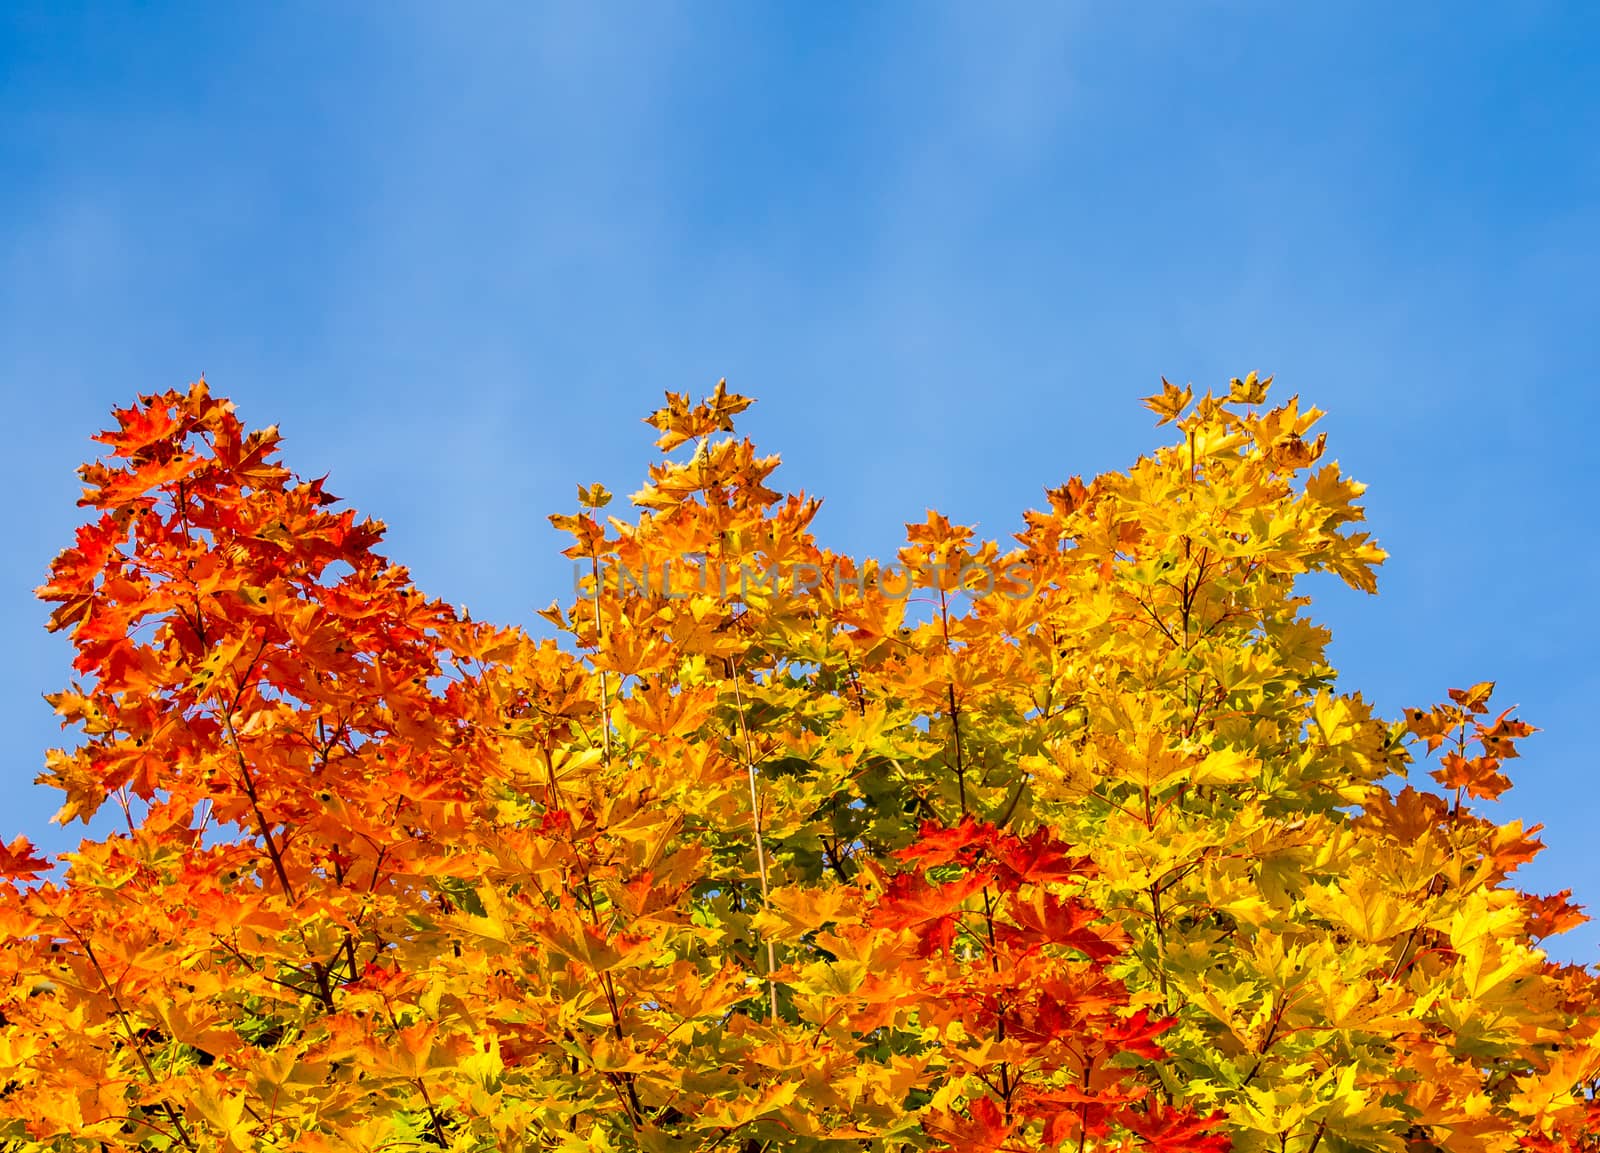 Colorful maple leafs by Alexanderphoto